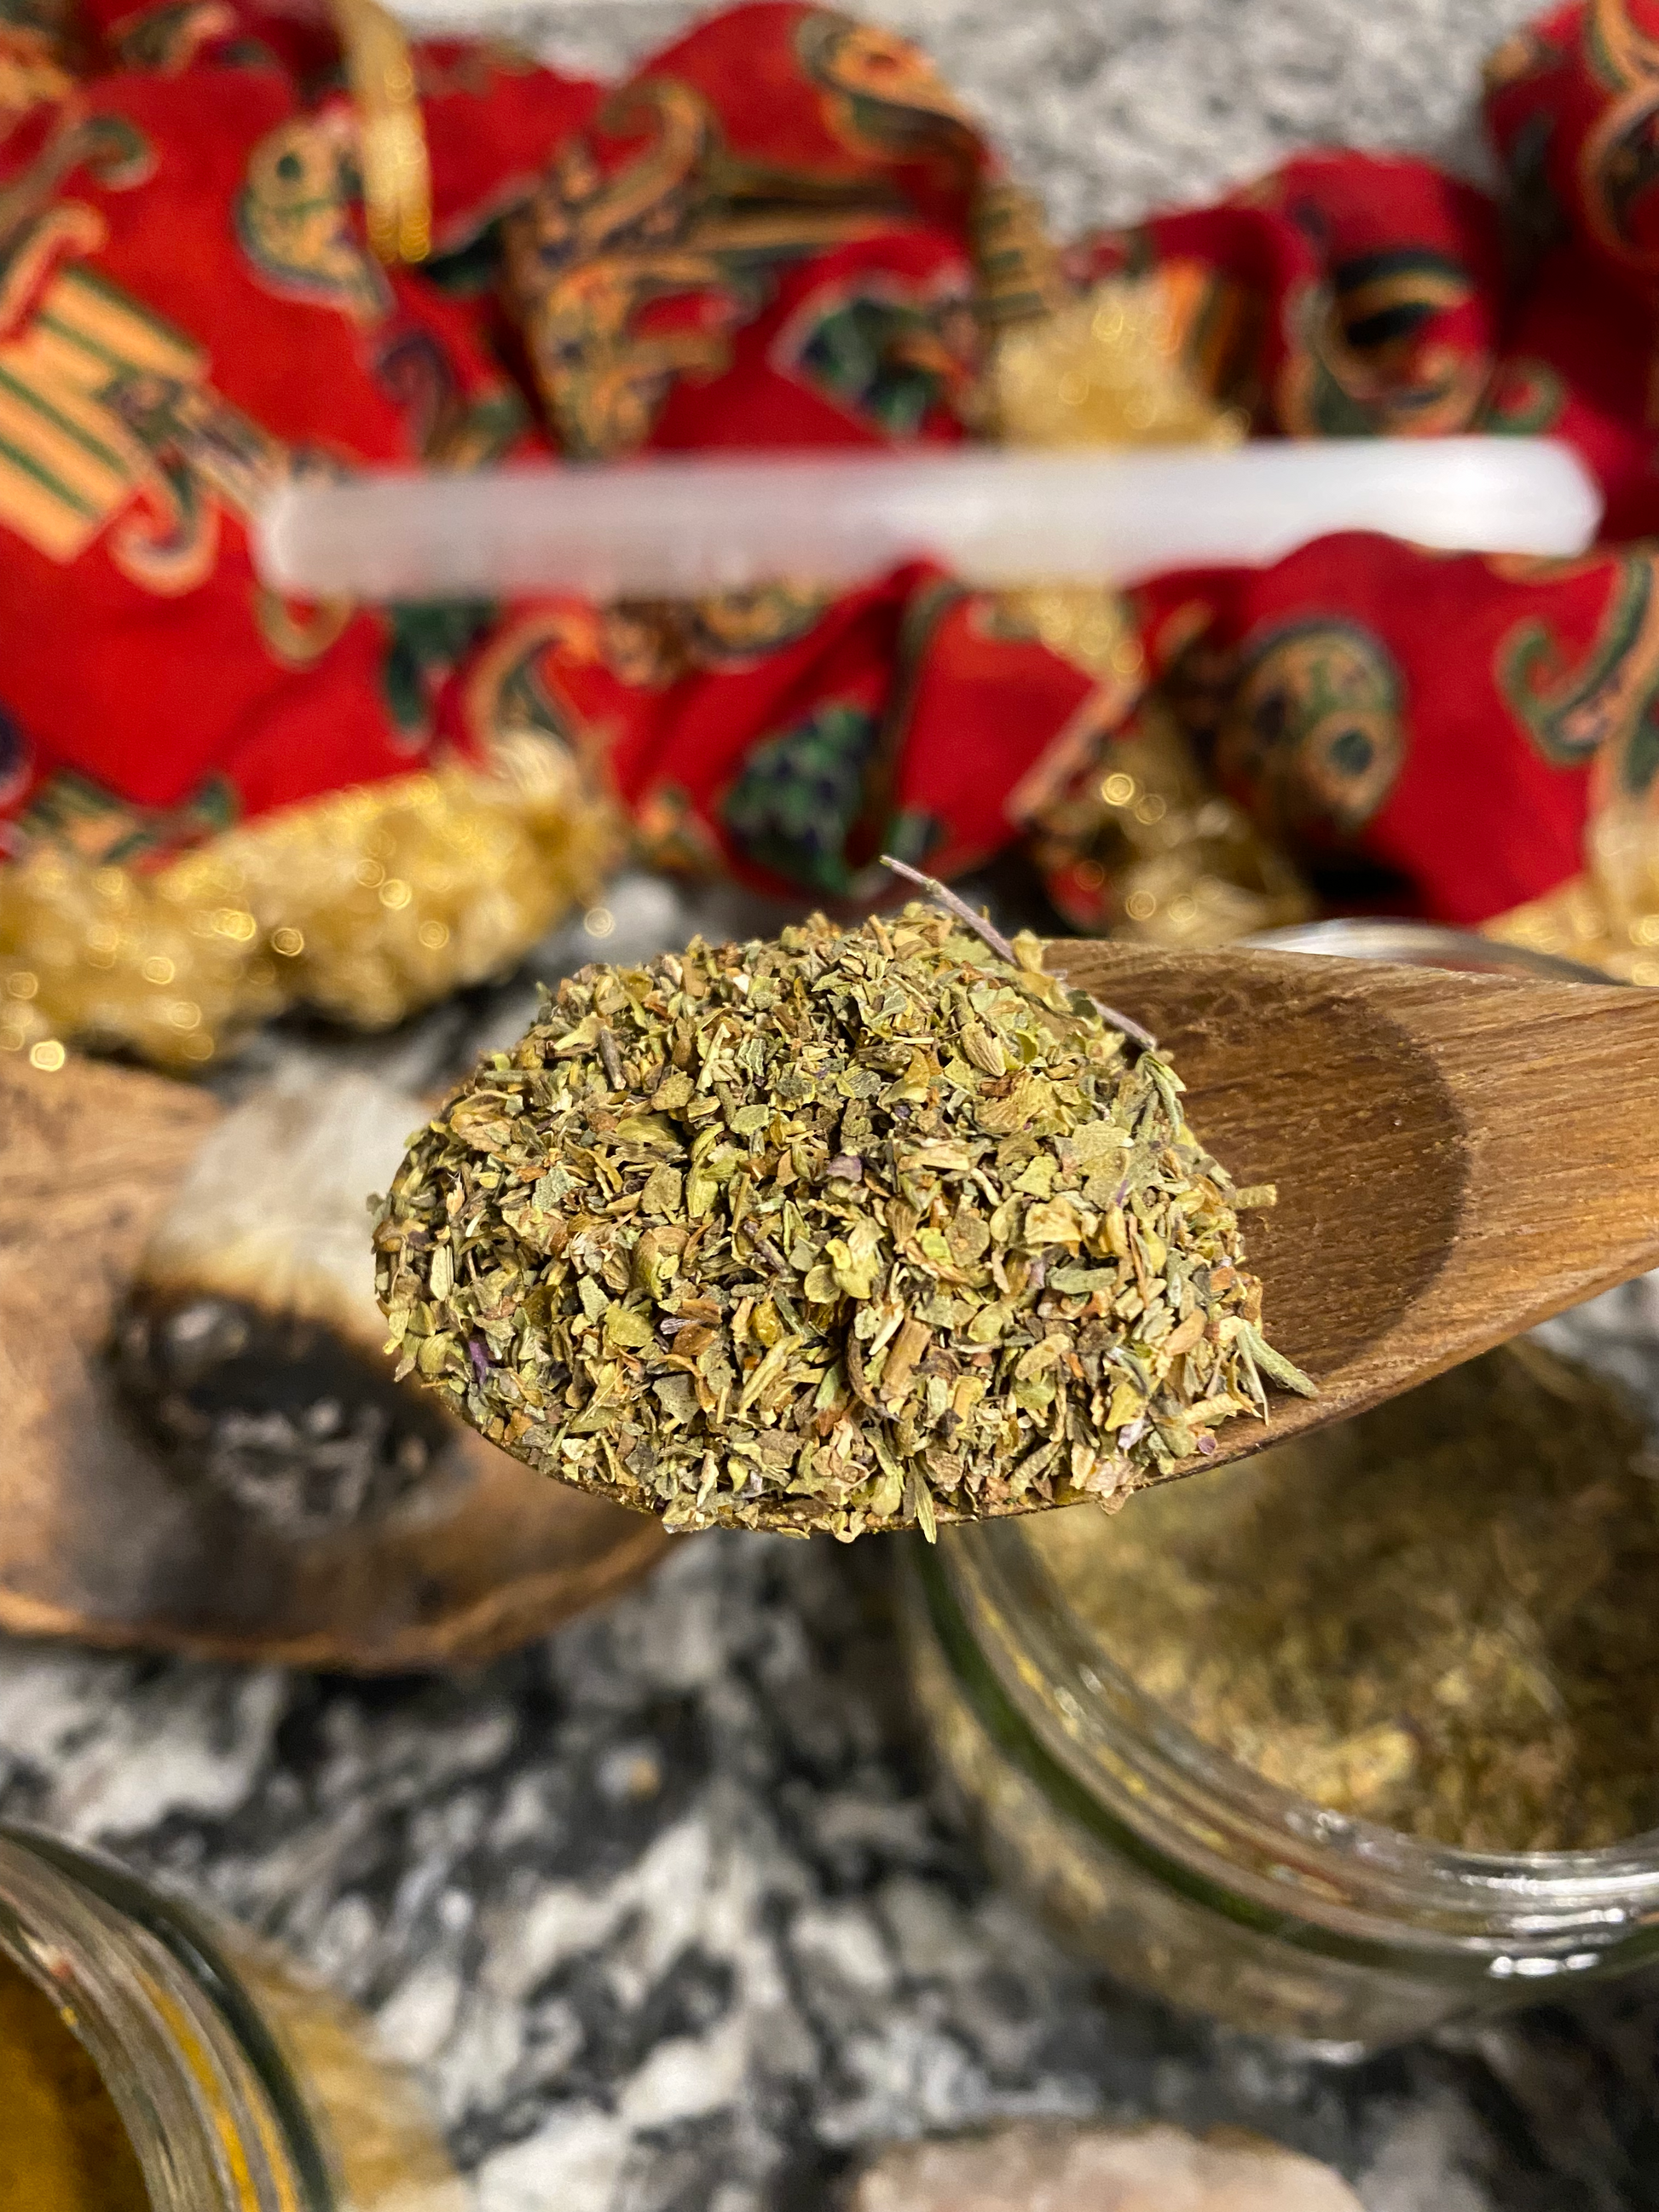 green herbal spice blend in a wooden spoon. there is a glass jar with more of the blend, and a red scarf and crystals in the picture as well. 